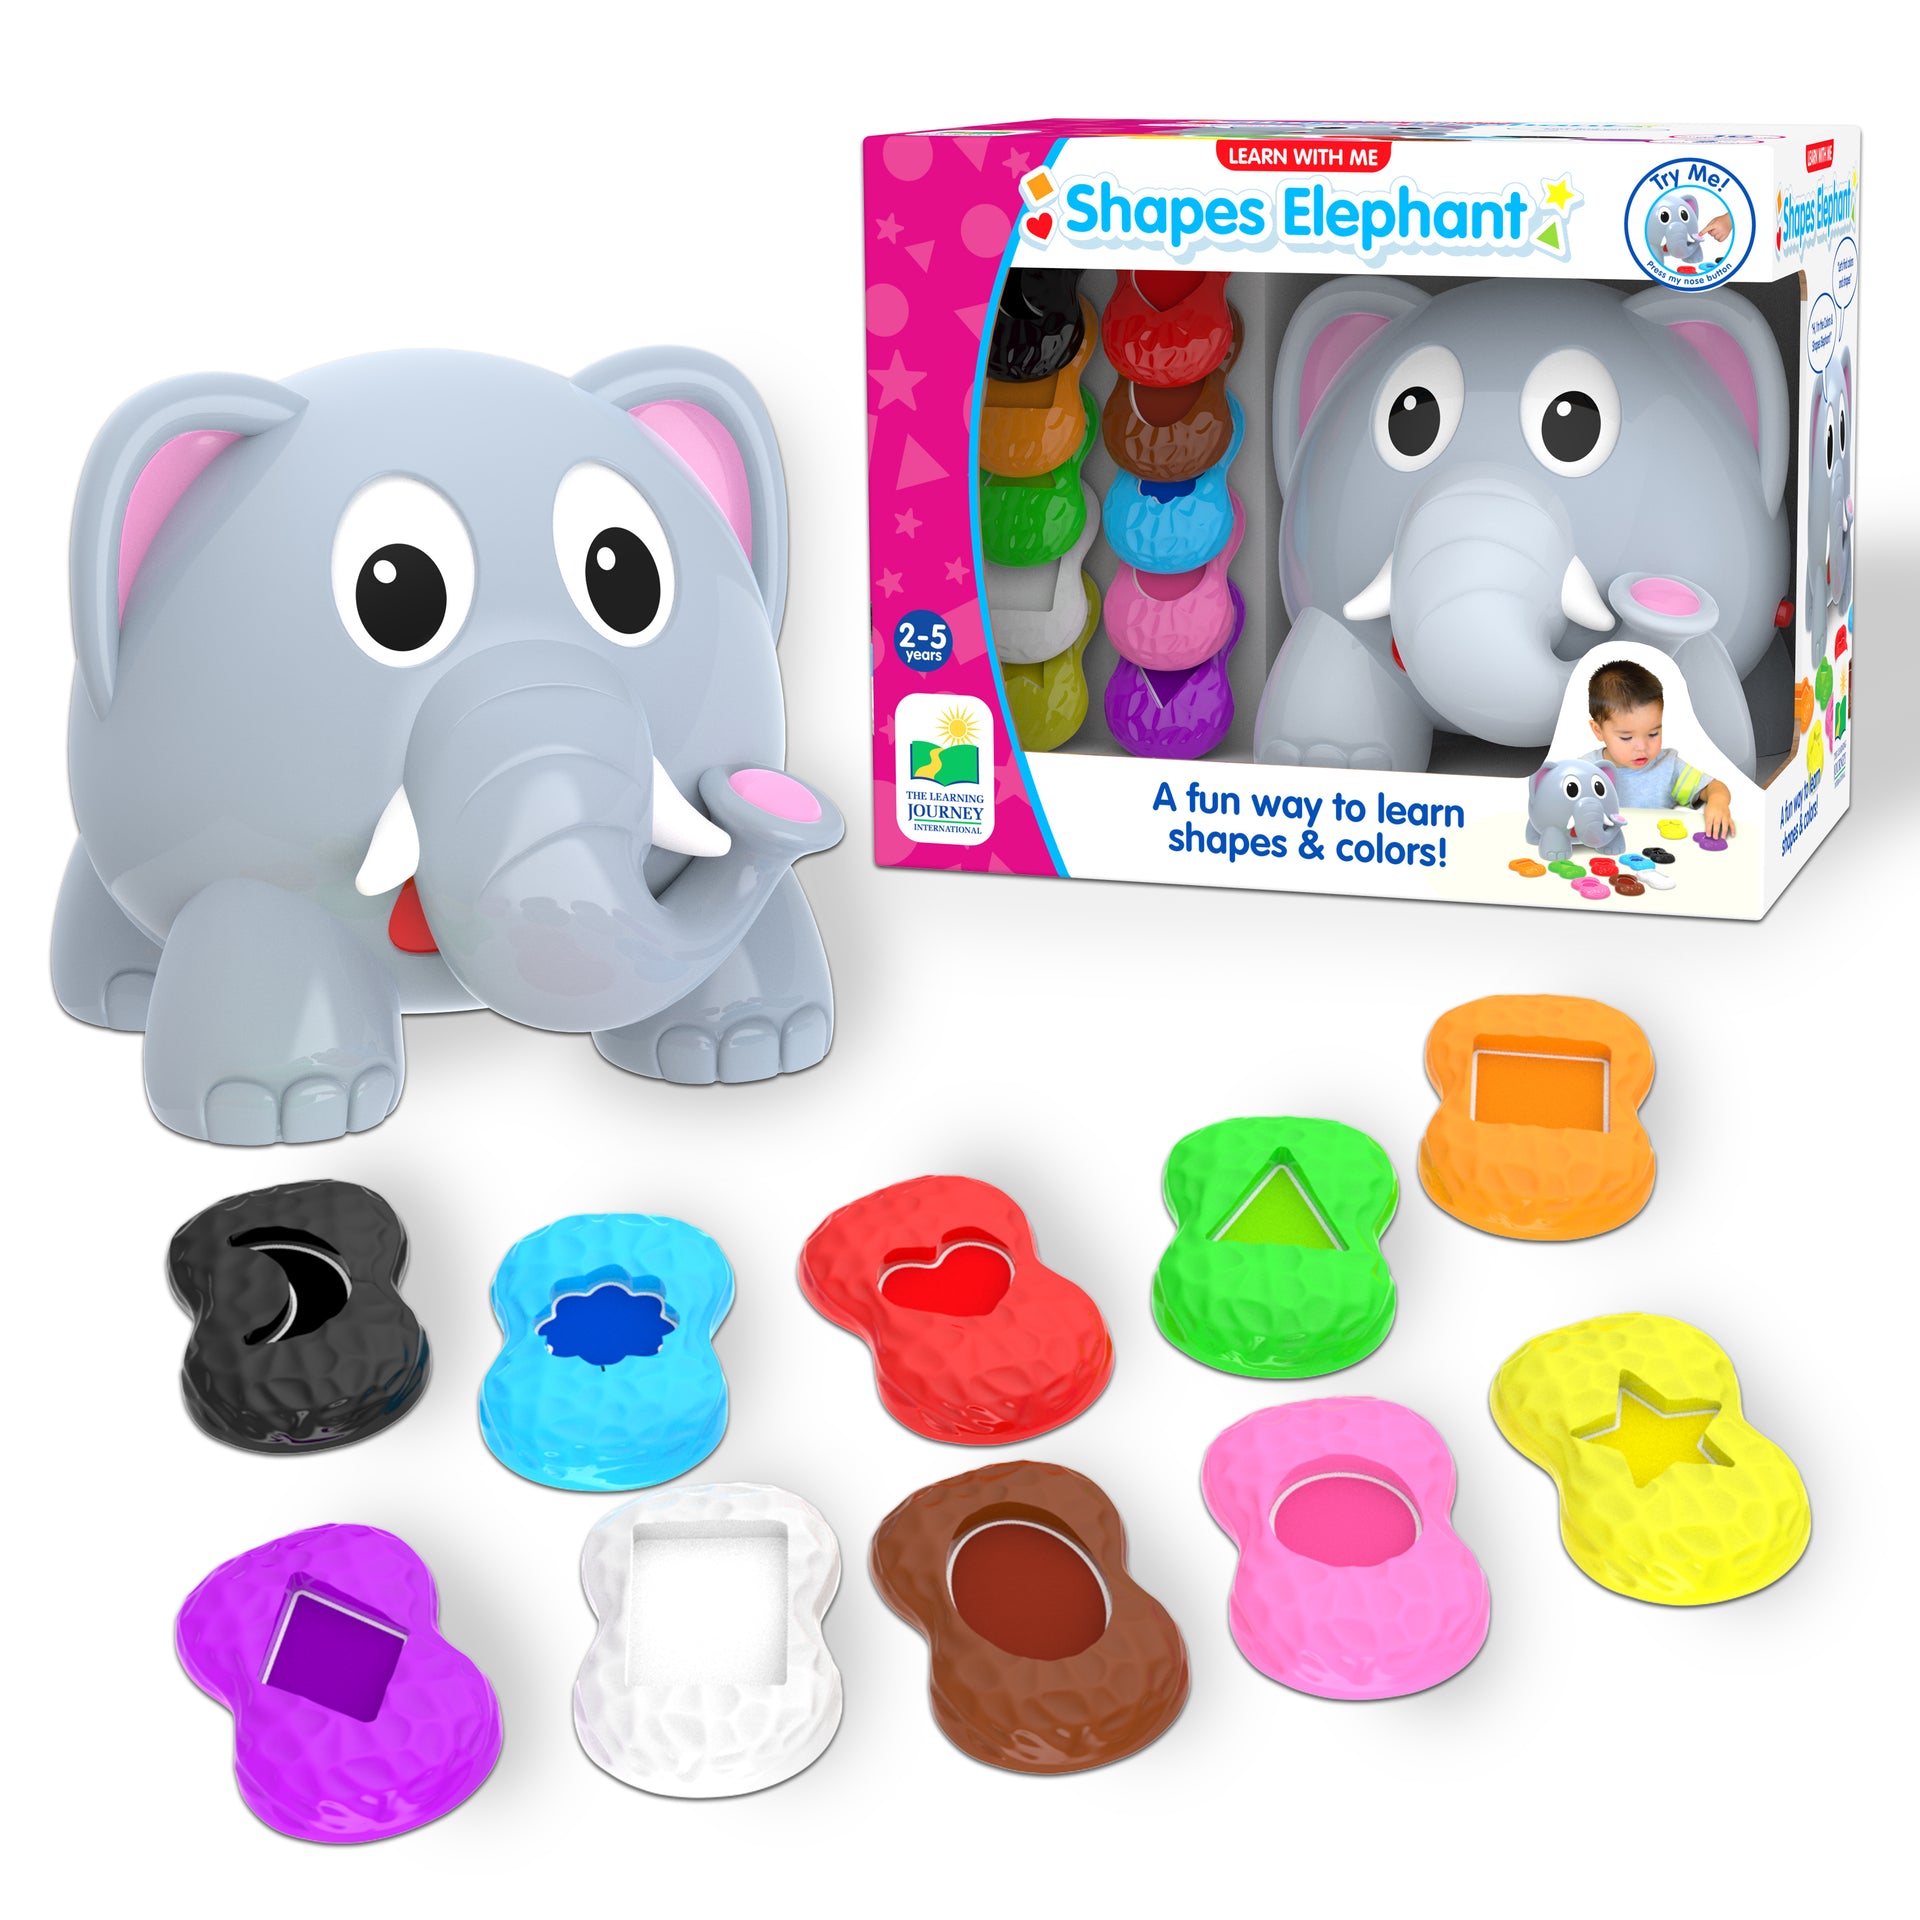 Learn with Me - Shapes Elephant – The Learning Journey